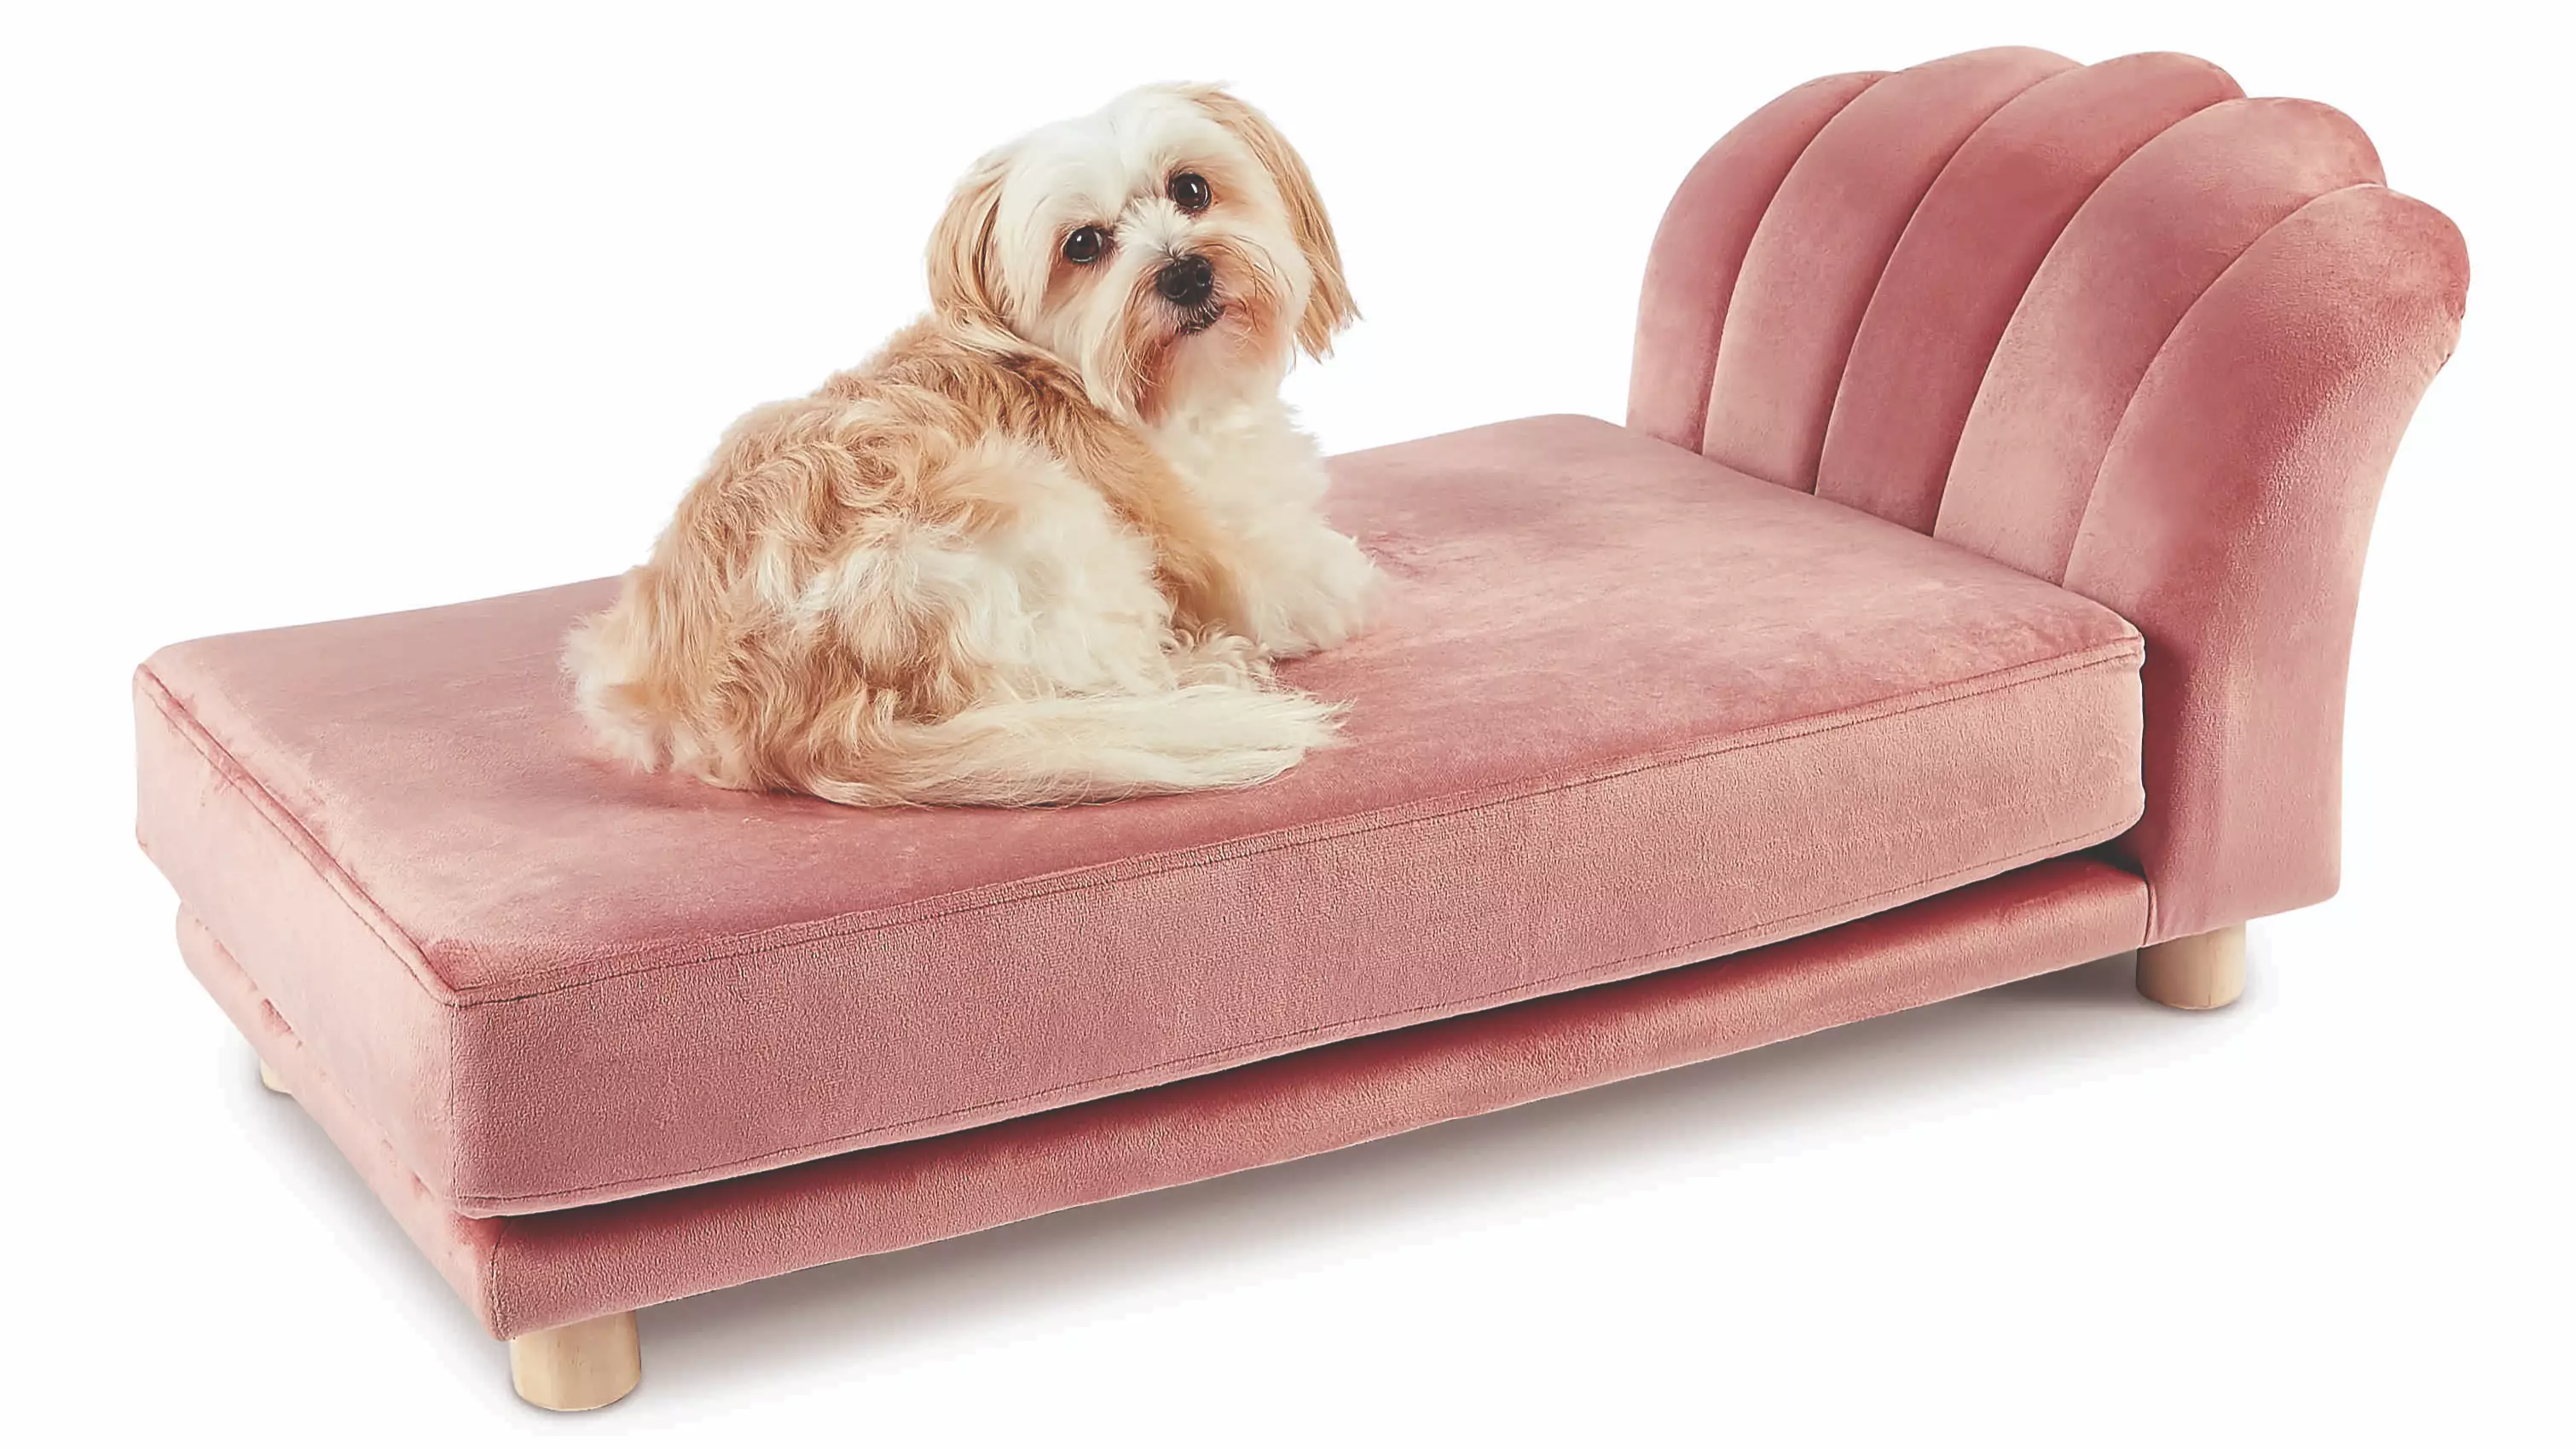 Aldi has also launched luxury pet beds (